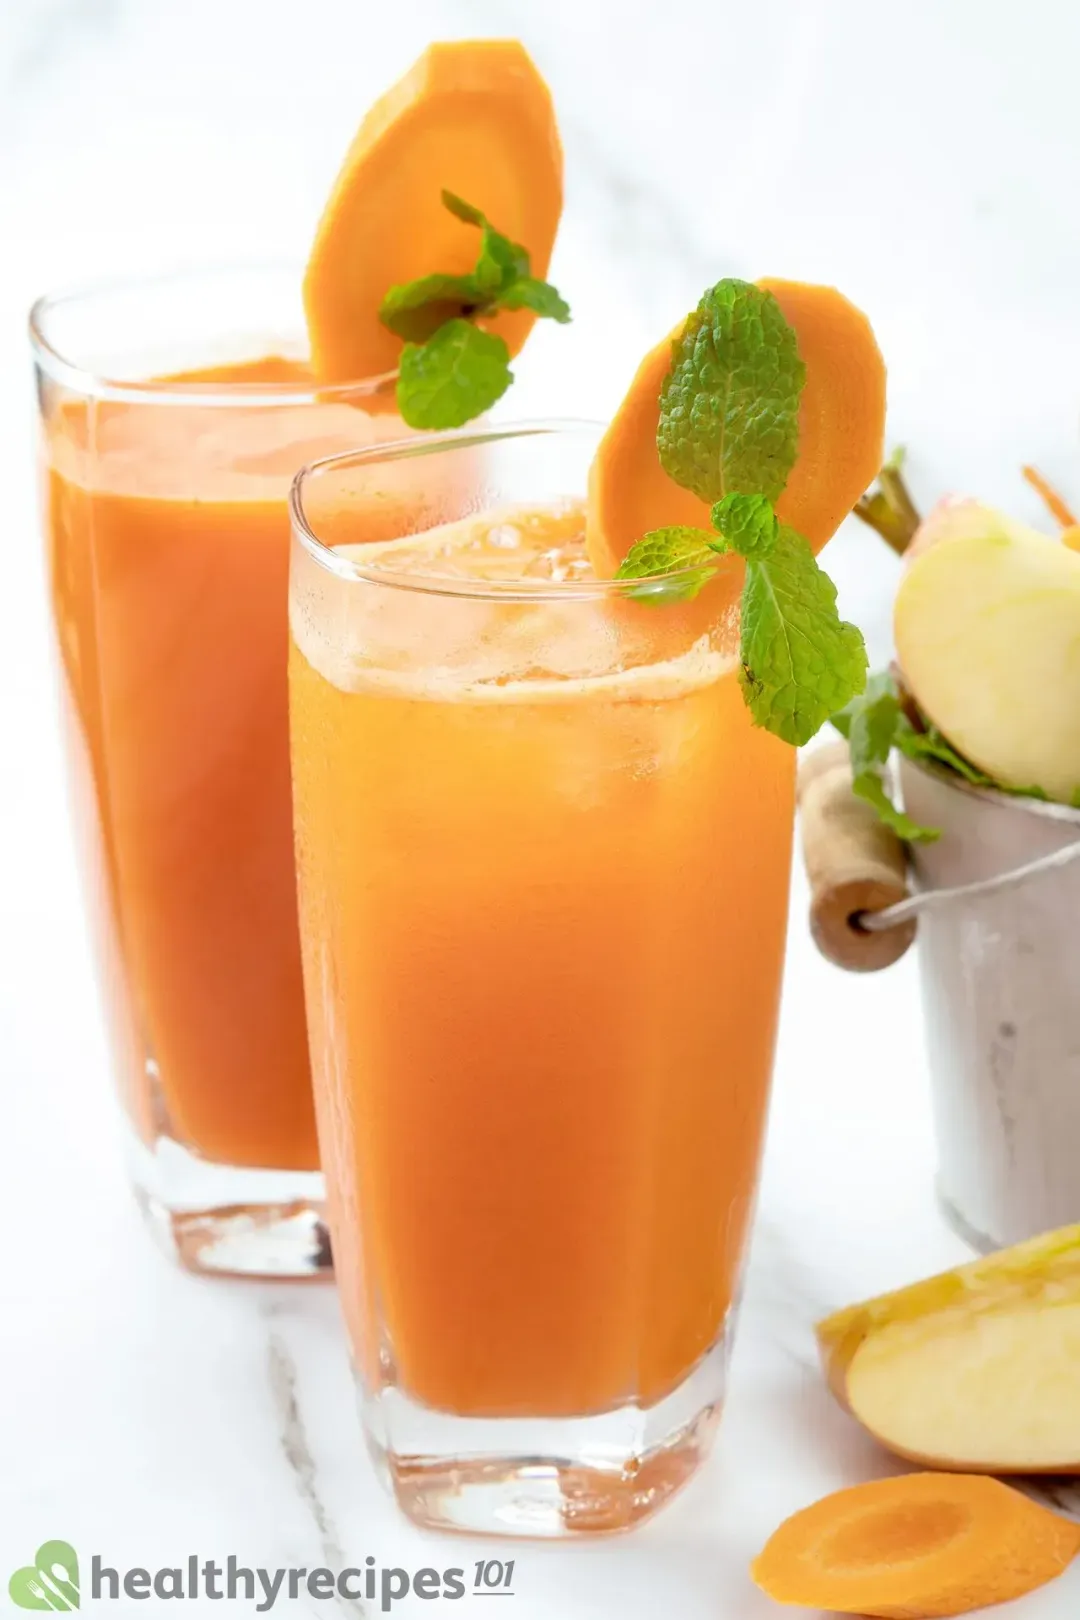 Two tall glasses of an Orange carrot drink Garnished with mint leaves, carrot slices and Apple quarters